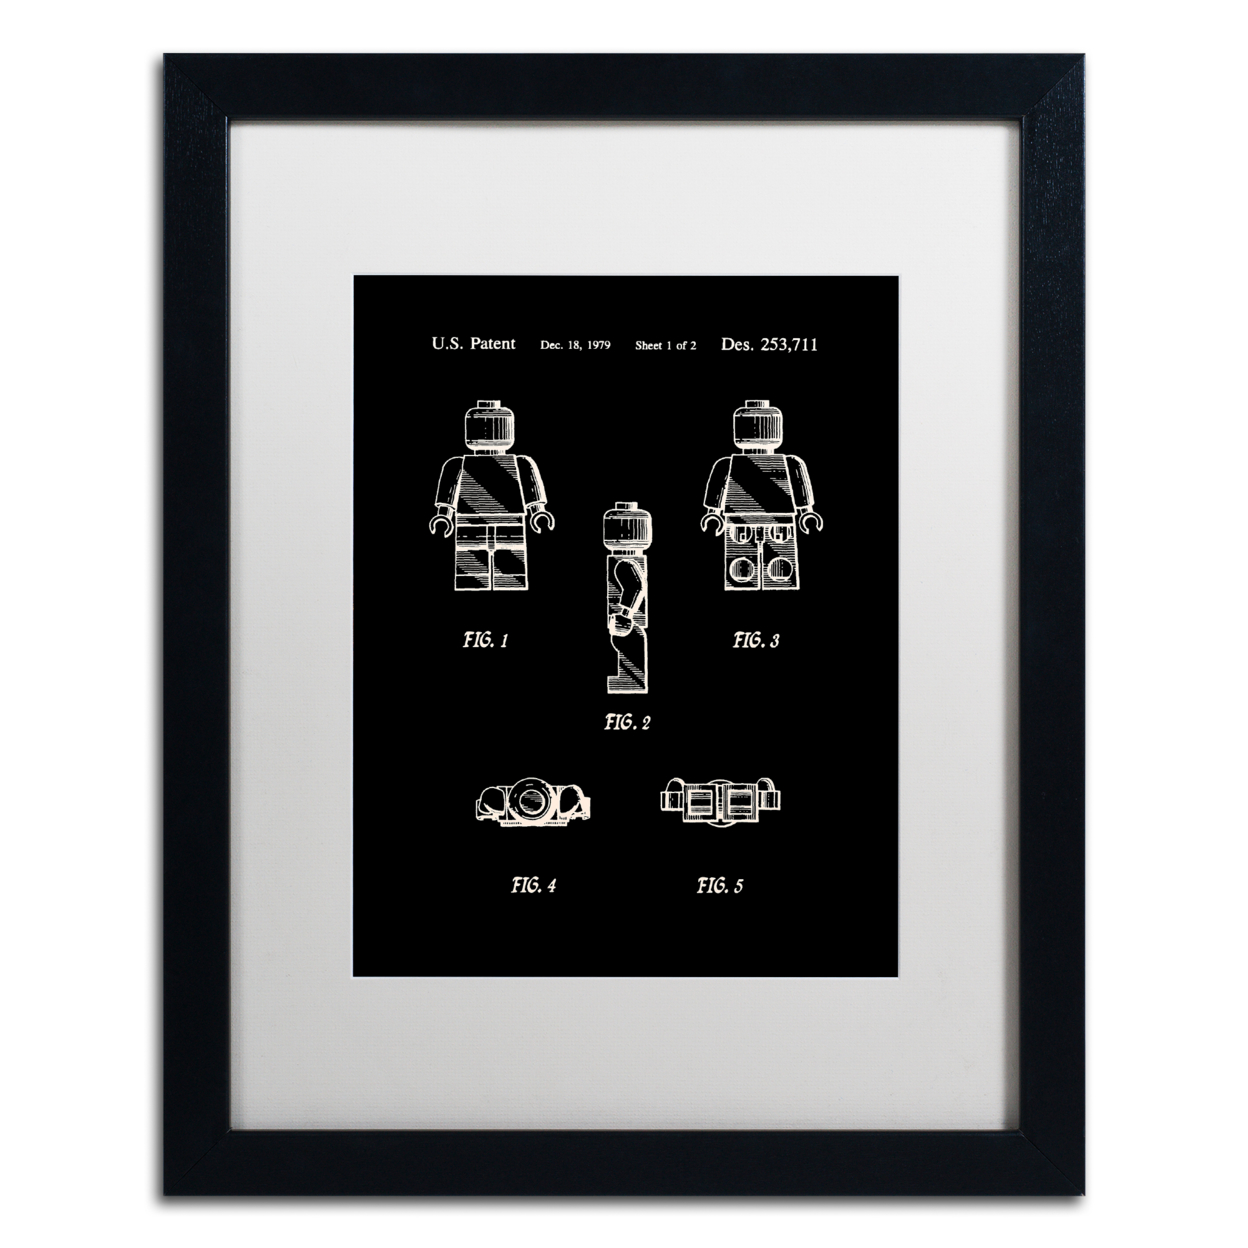 Claire Doherty 'Lego Man Patent 1979 Page 1 Black' Black Wooden Framed Art 18 X 22 Inches